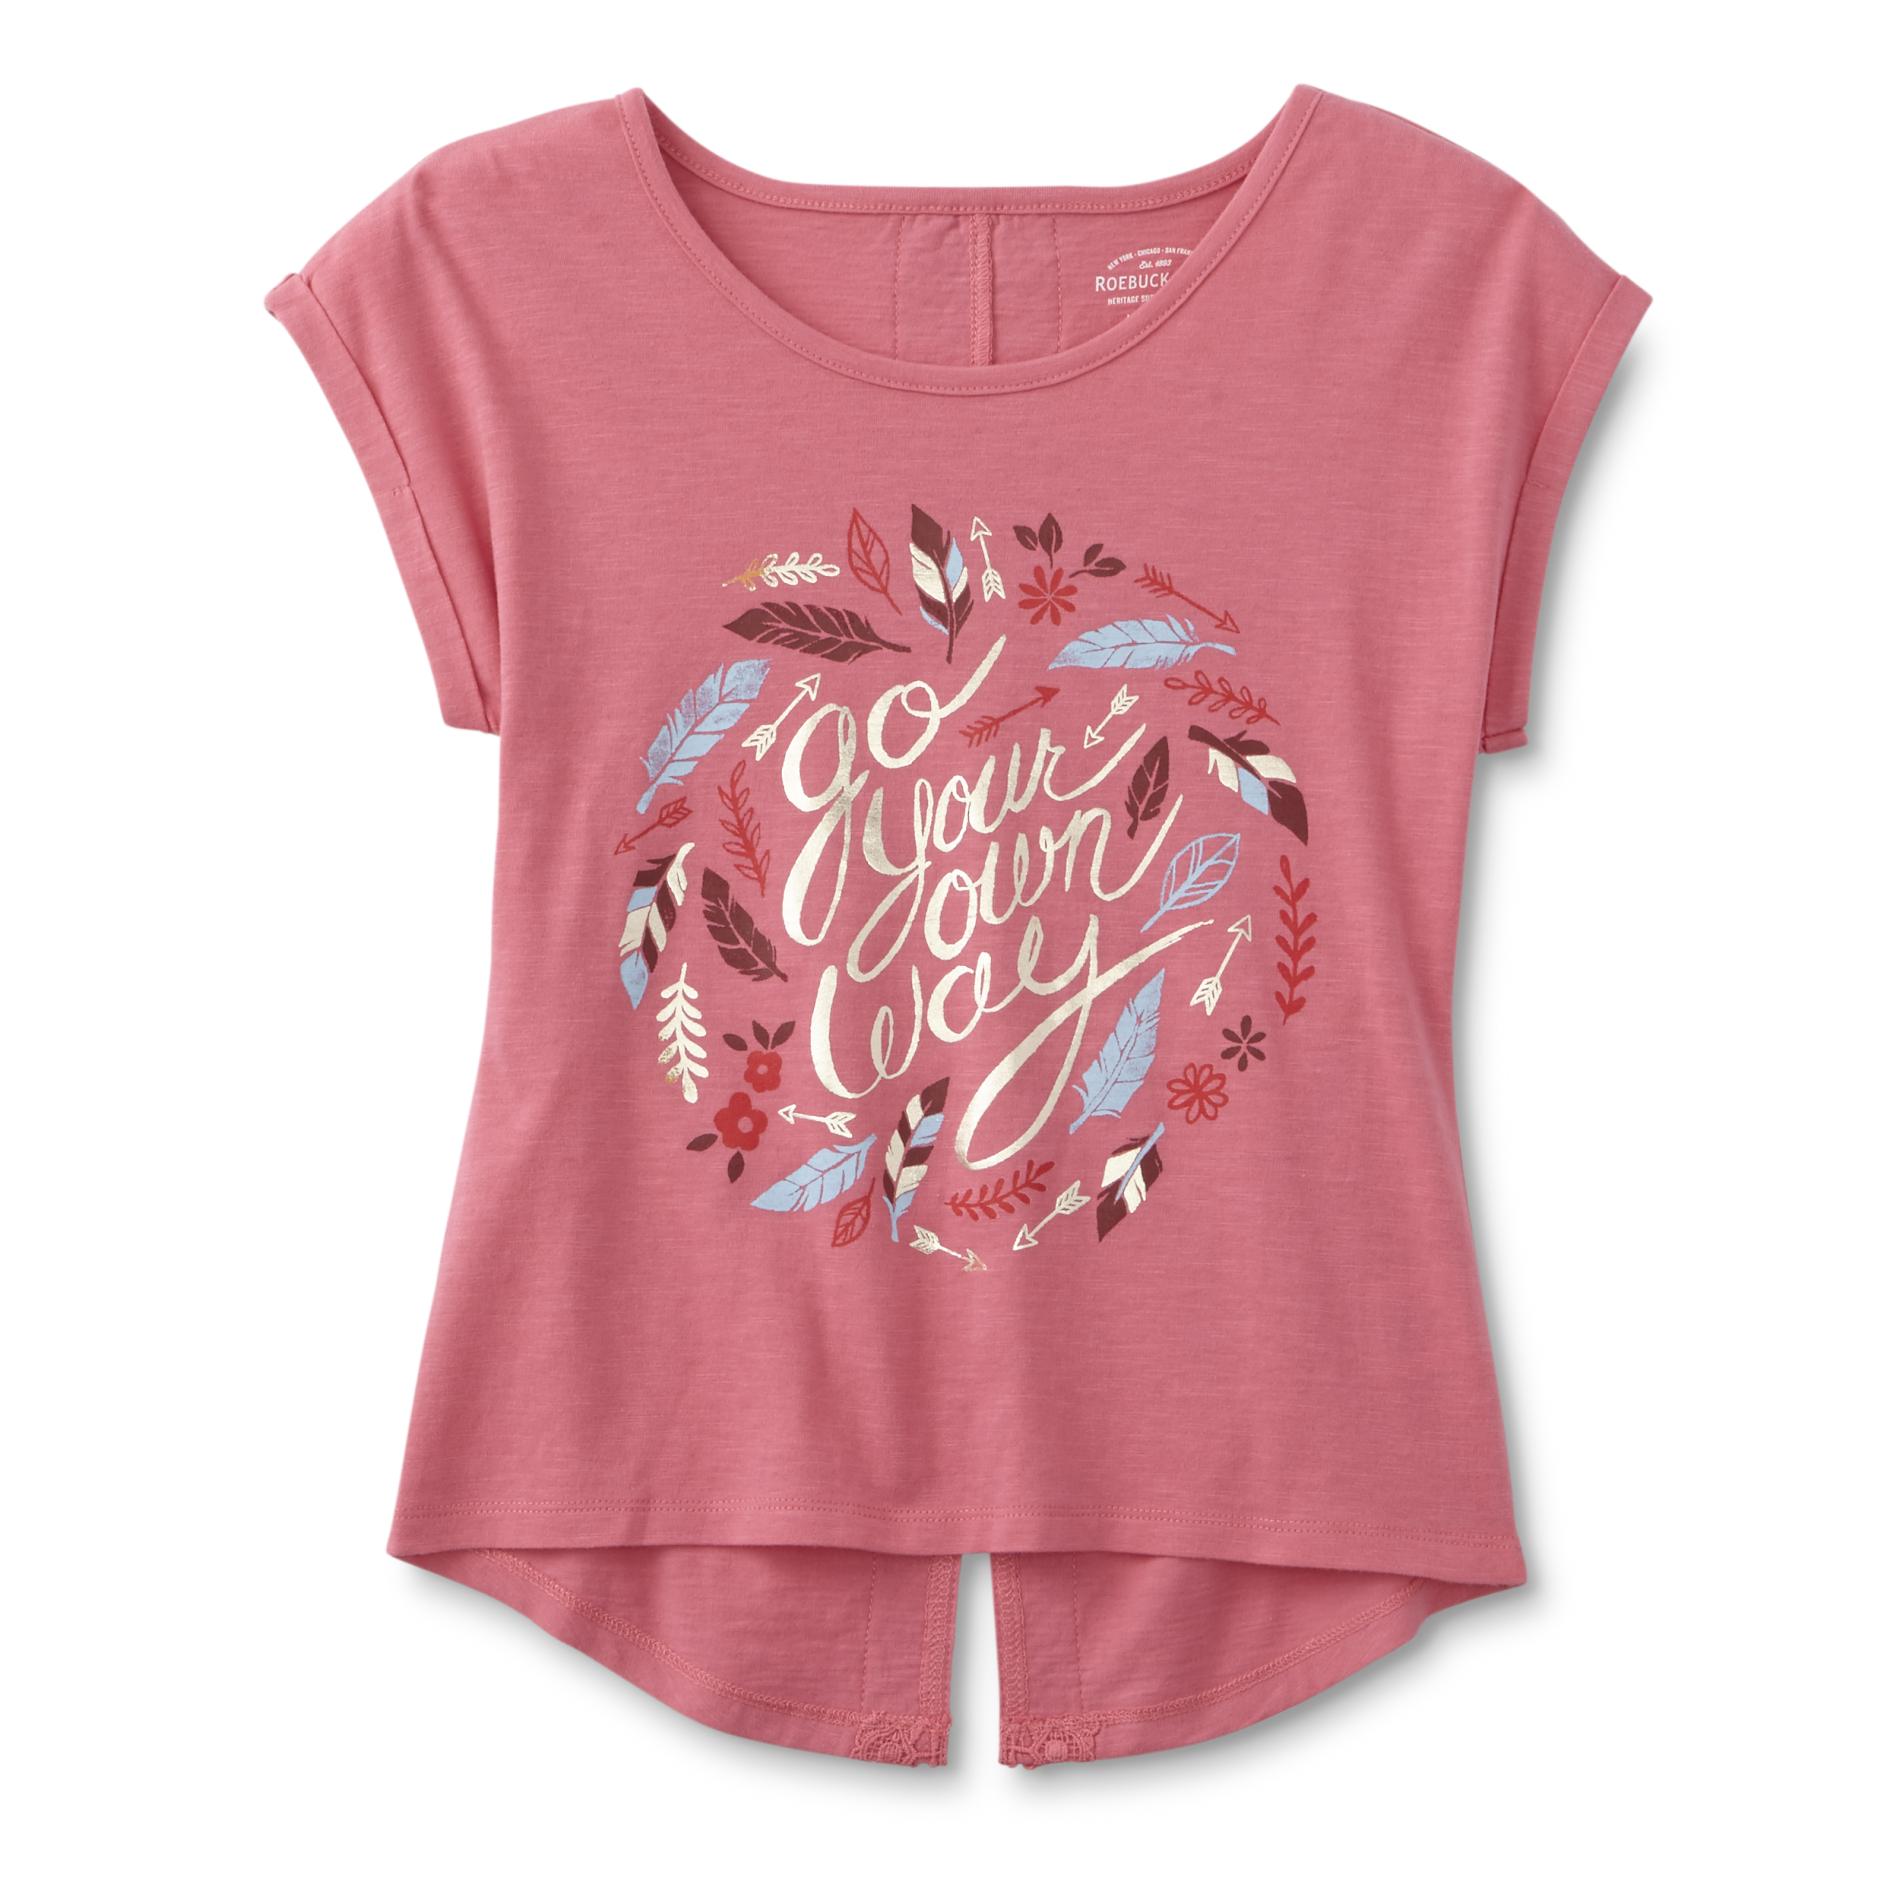 ROEBUCK & CO R1893 Girl's Graphic T-Shirt - Go Your Own Way